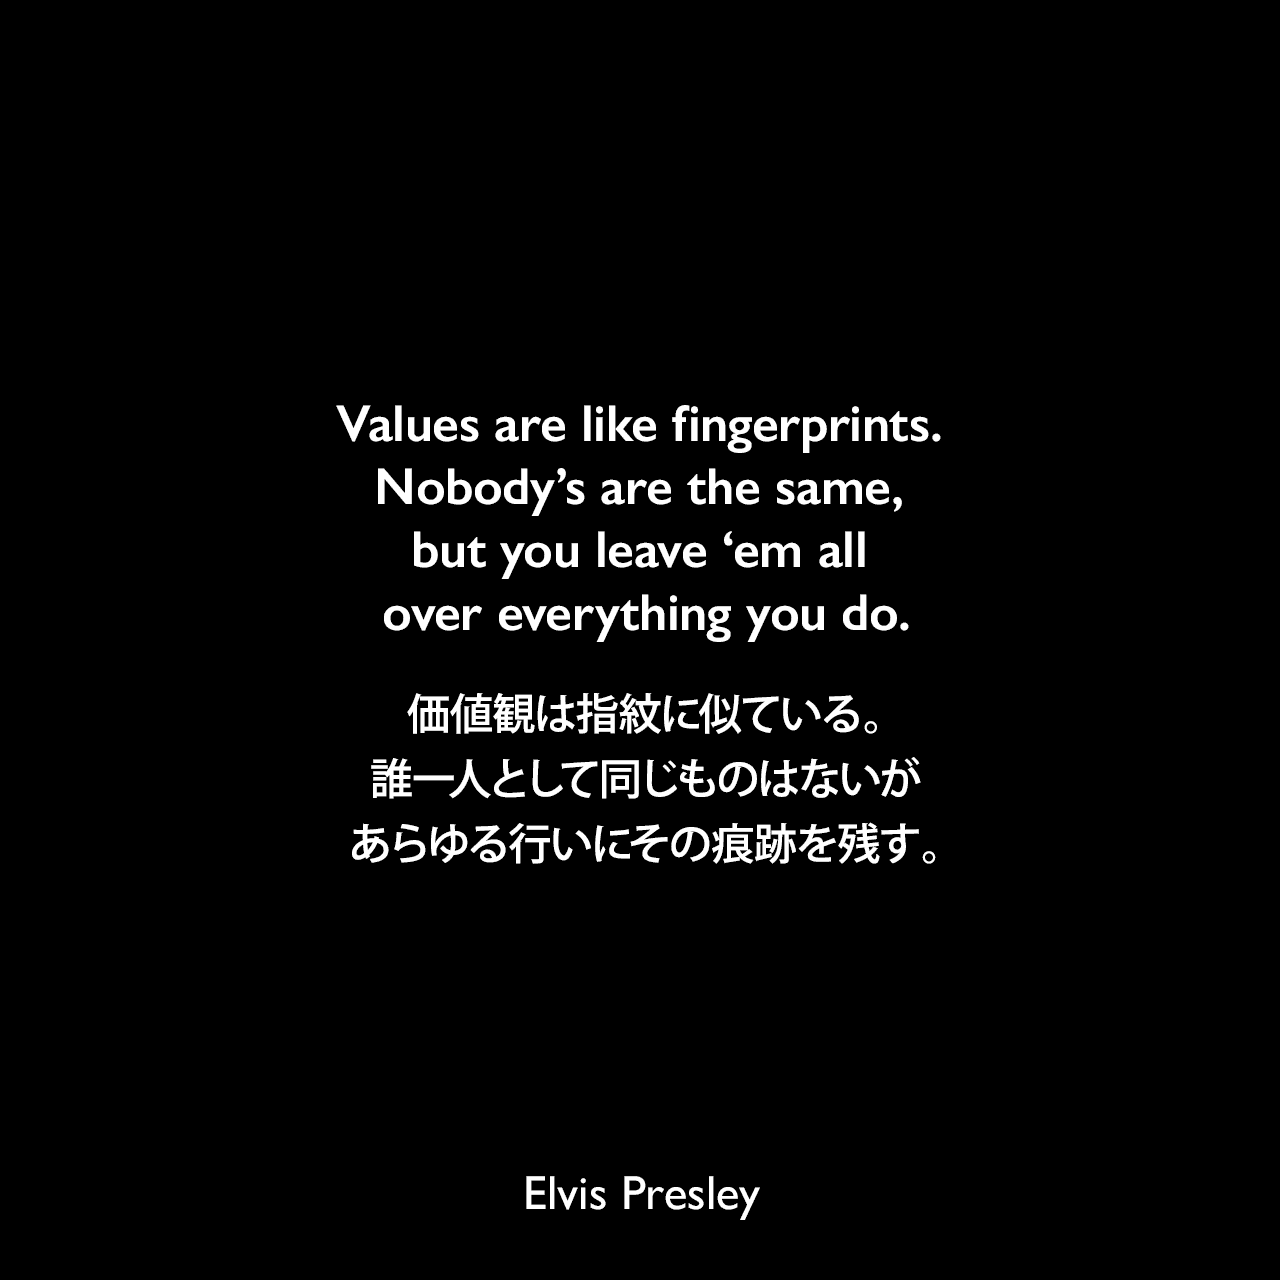 Values are like fingerprints. Nobody’s are the same, but you leave ‘em all over everything you do.価値観は指紋に似ている。誰一人として同じものはないが、あらゆる行いにその痕跡を残す。Elvis Presley